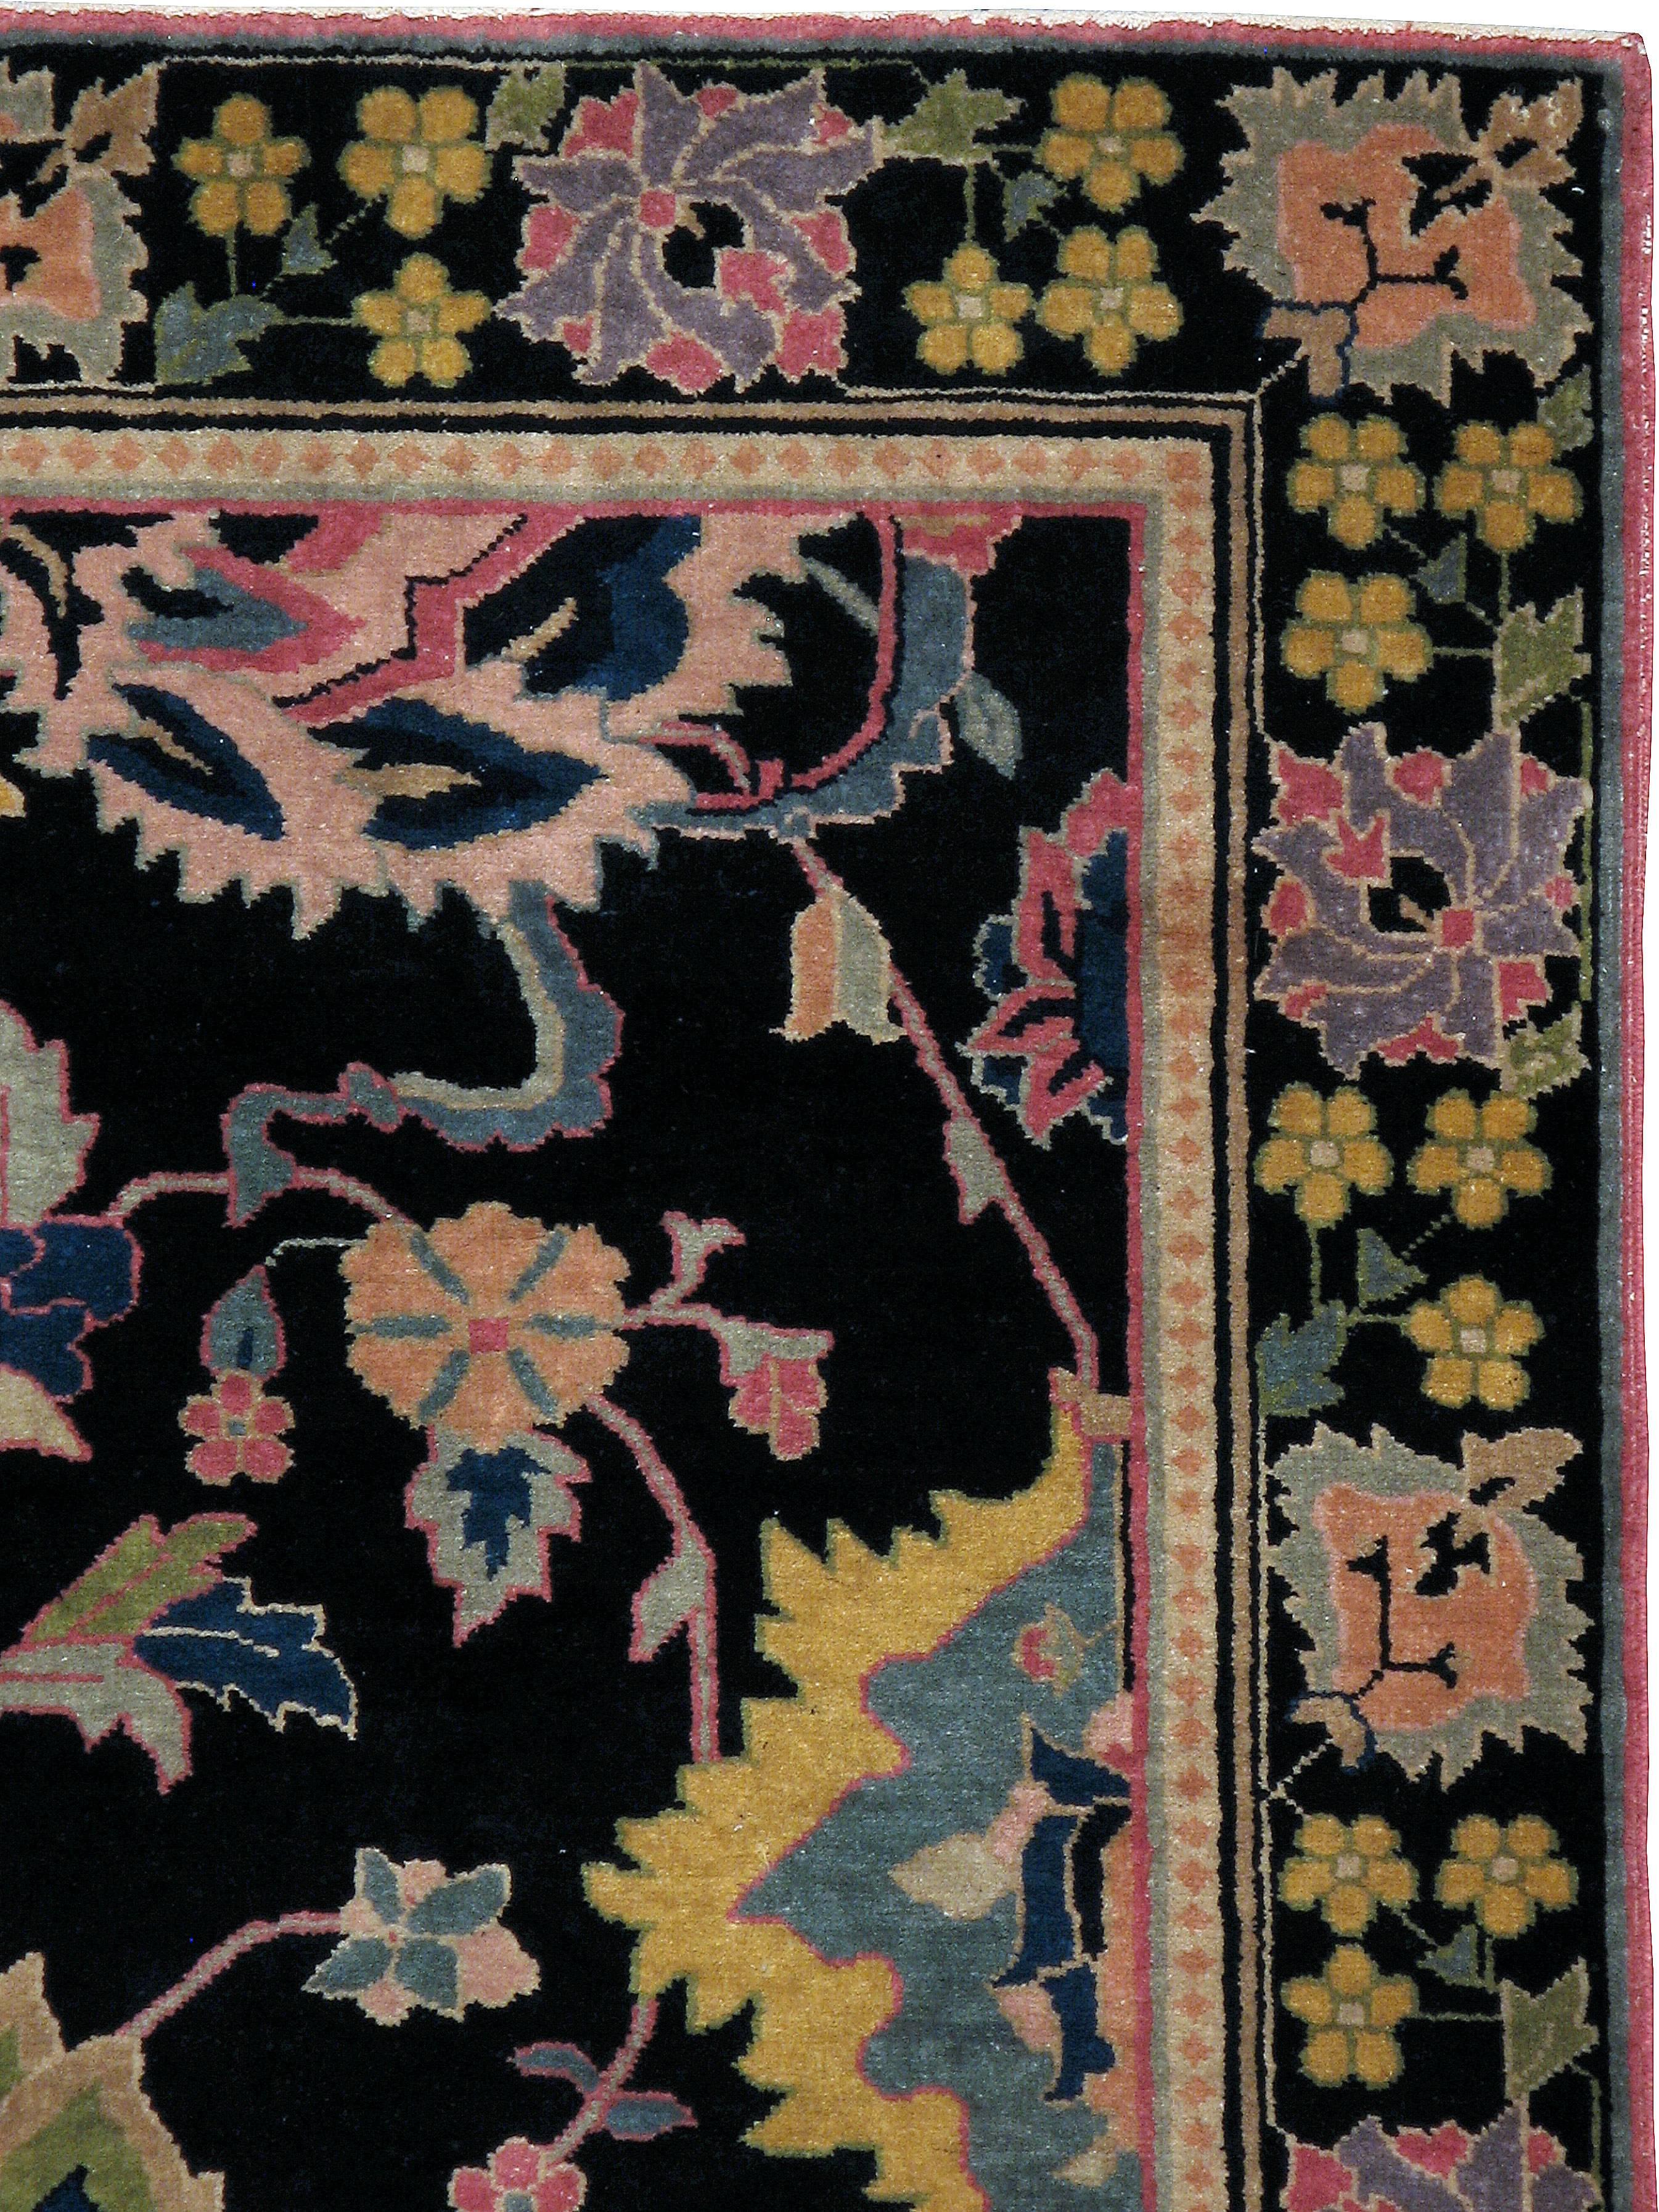 A vintage Indian Lahore carpet, from the second quarter of the 20th century, with an elicit floral pattern over a black field.